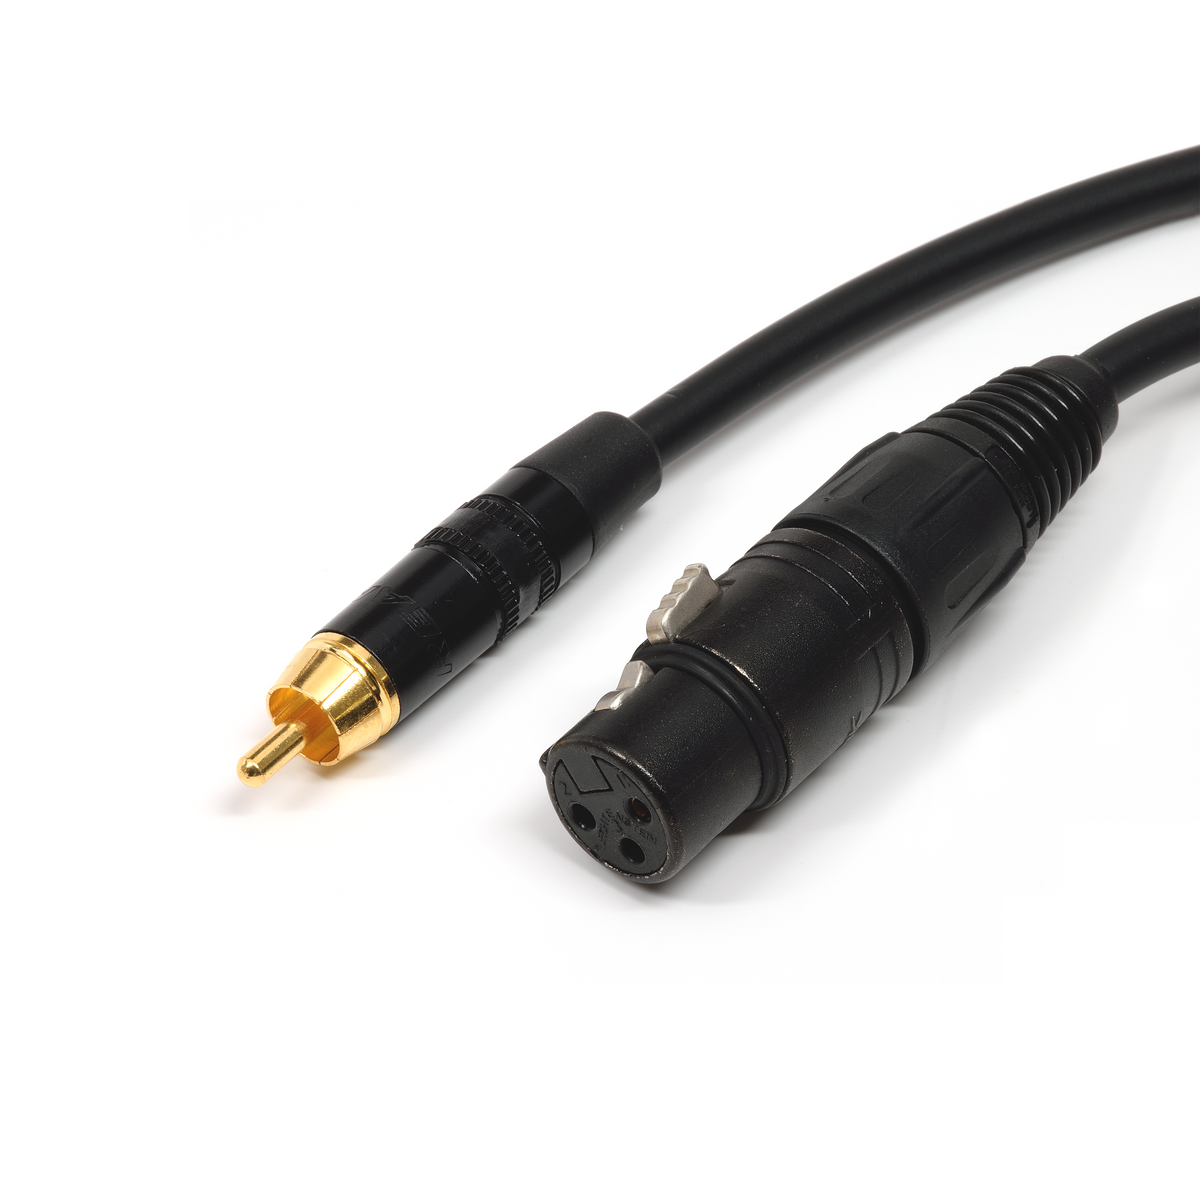 Benchmark XLRF to RCA Adapter Cable for Analog Audio - pin 3 floating